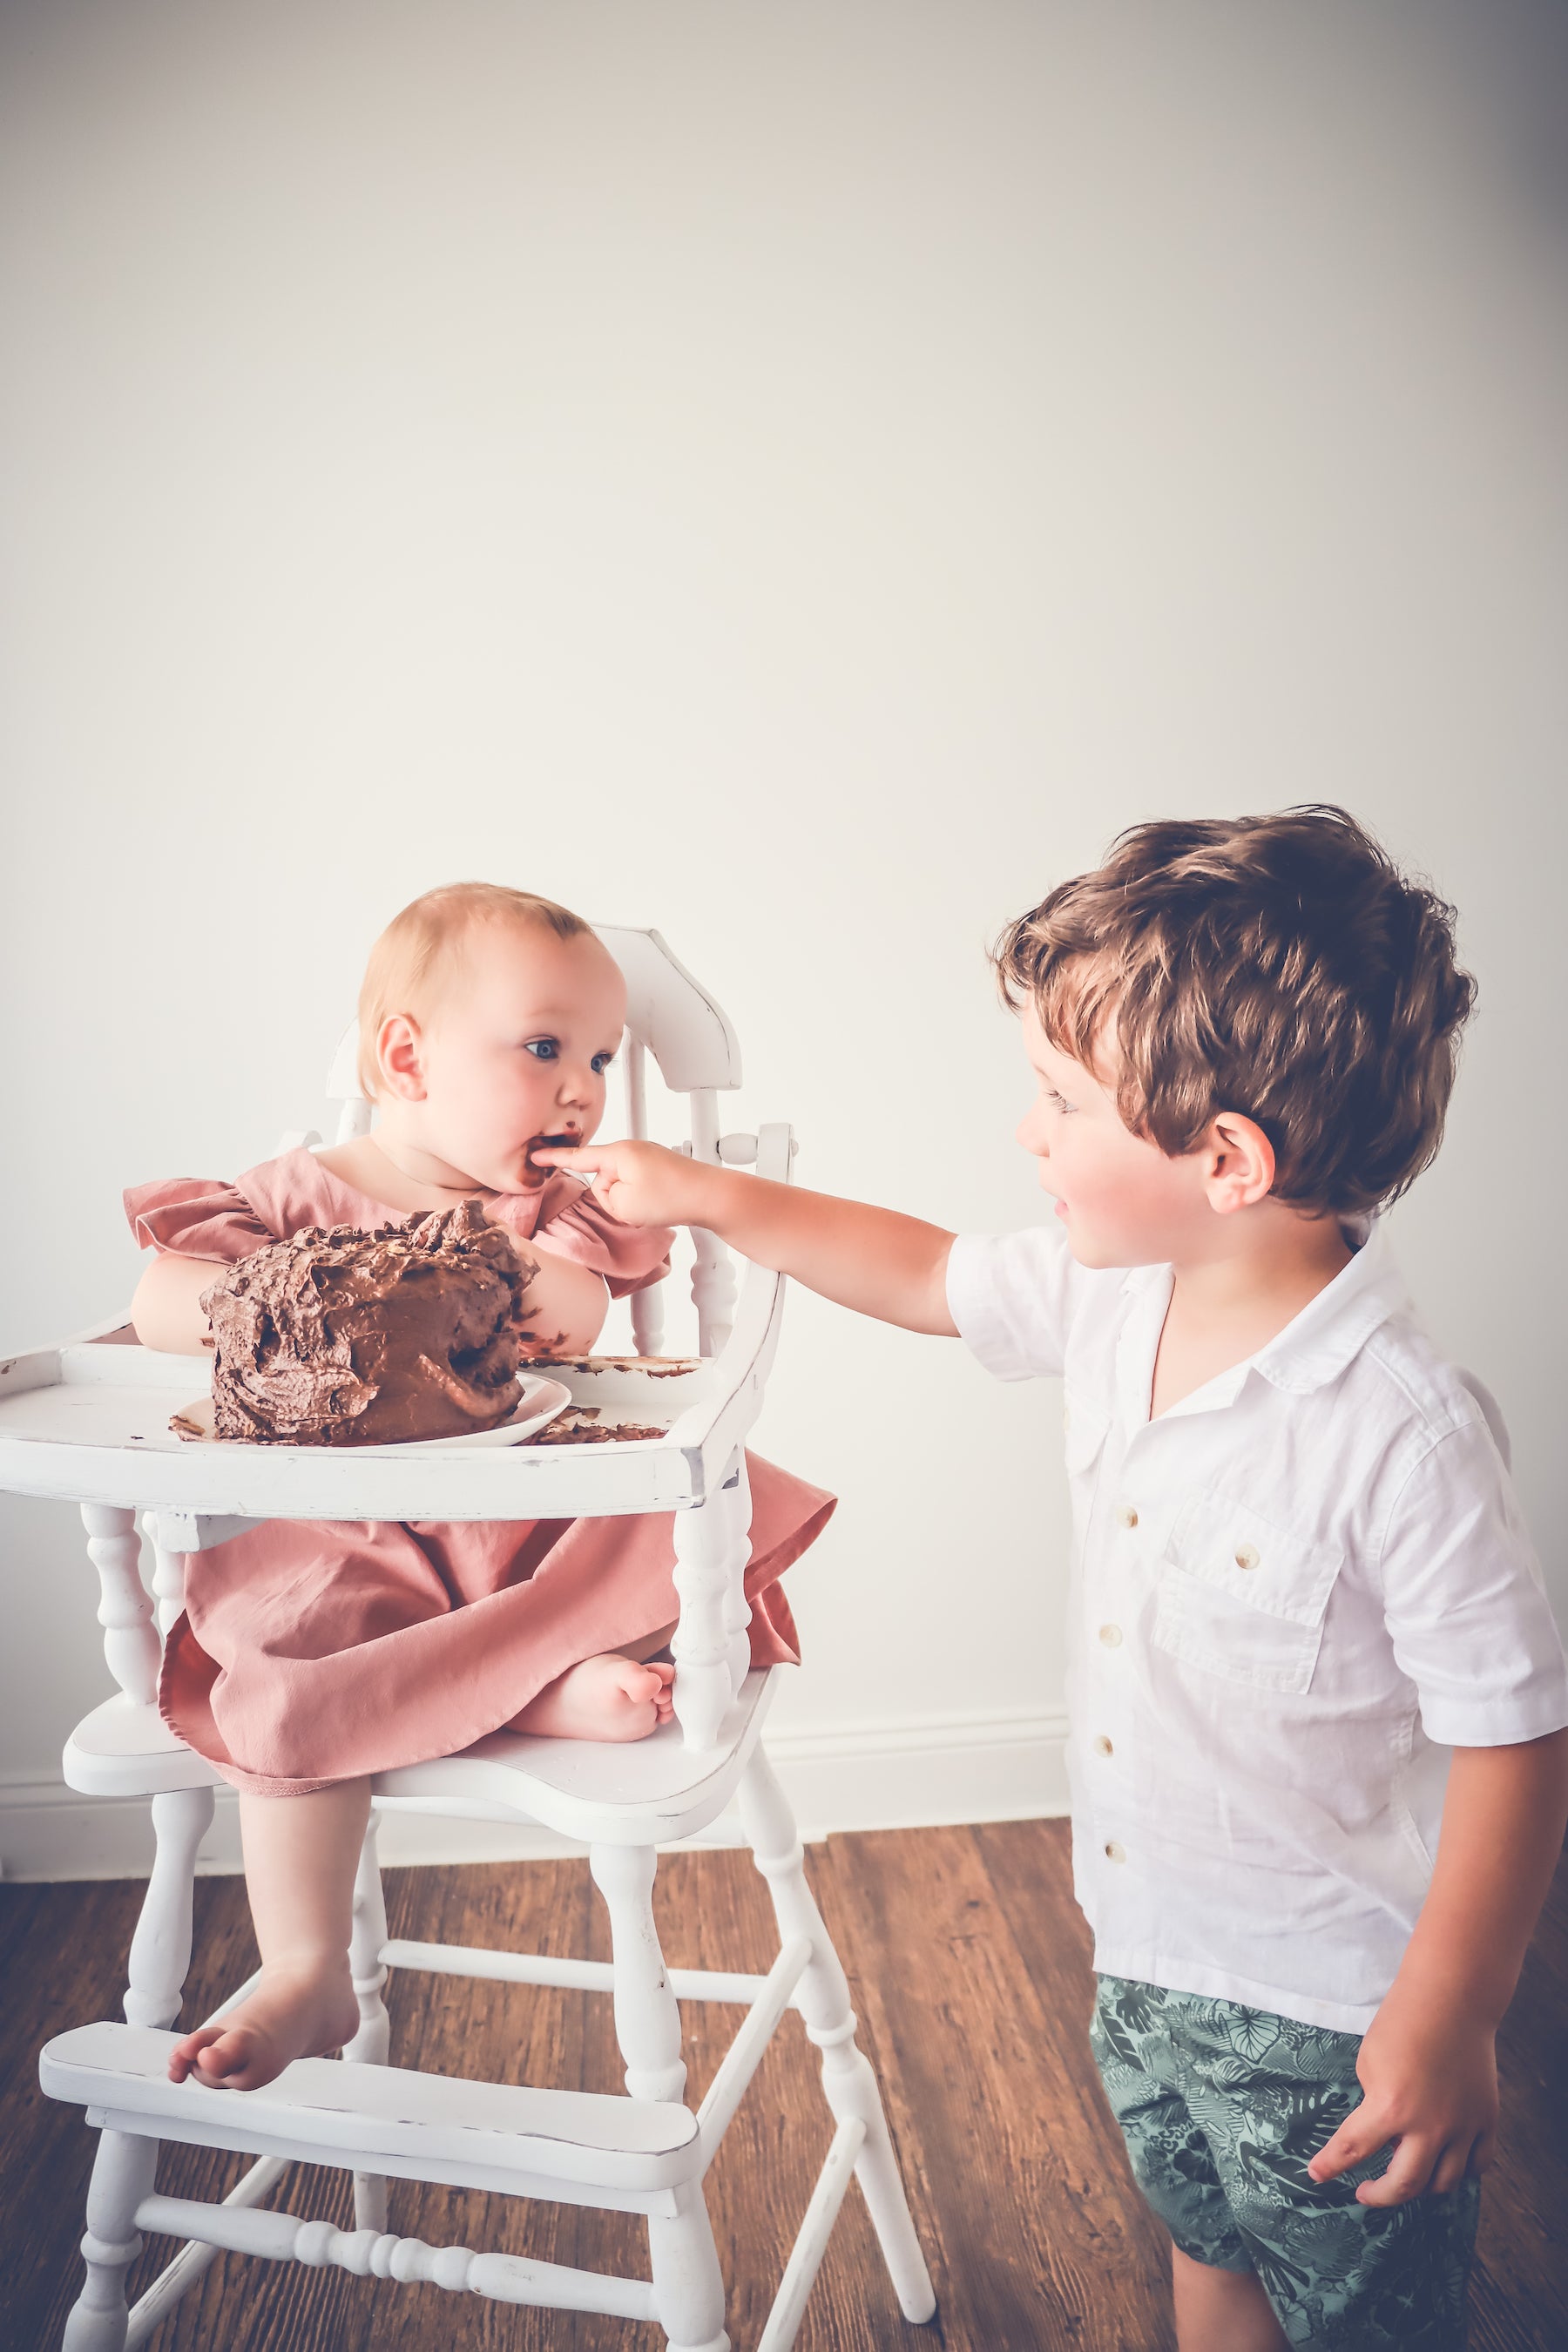 A baby smashing a chocolate cake with a sibling 